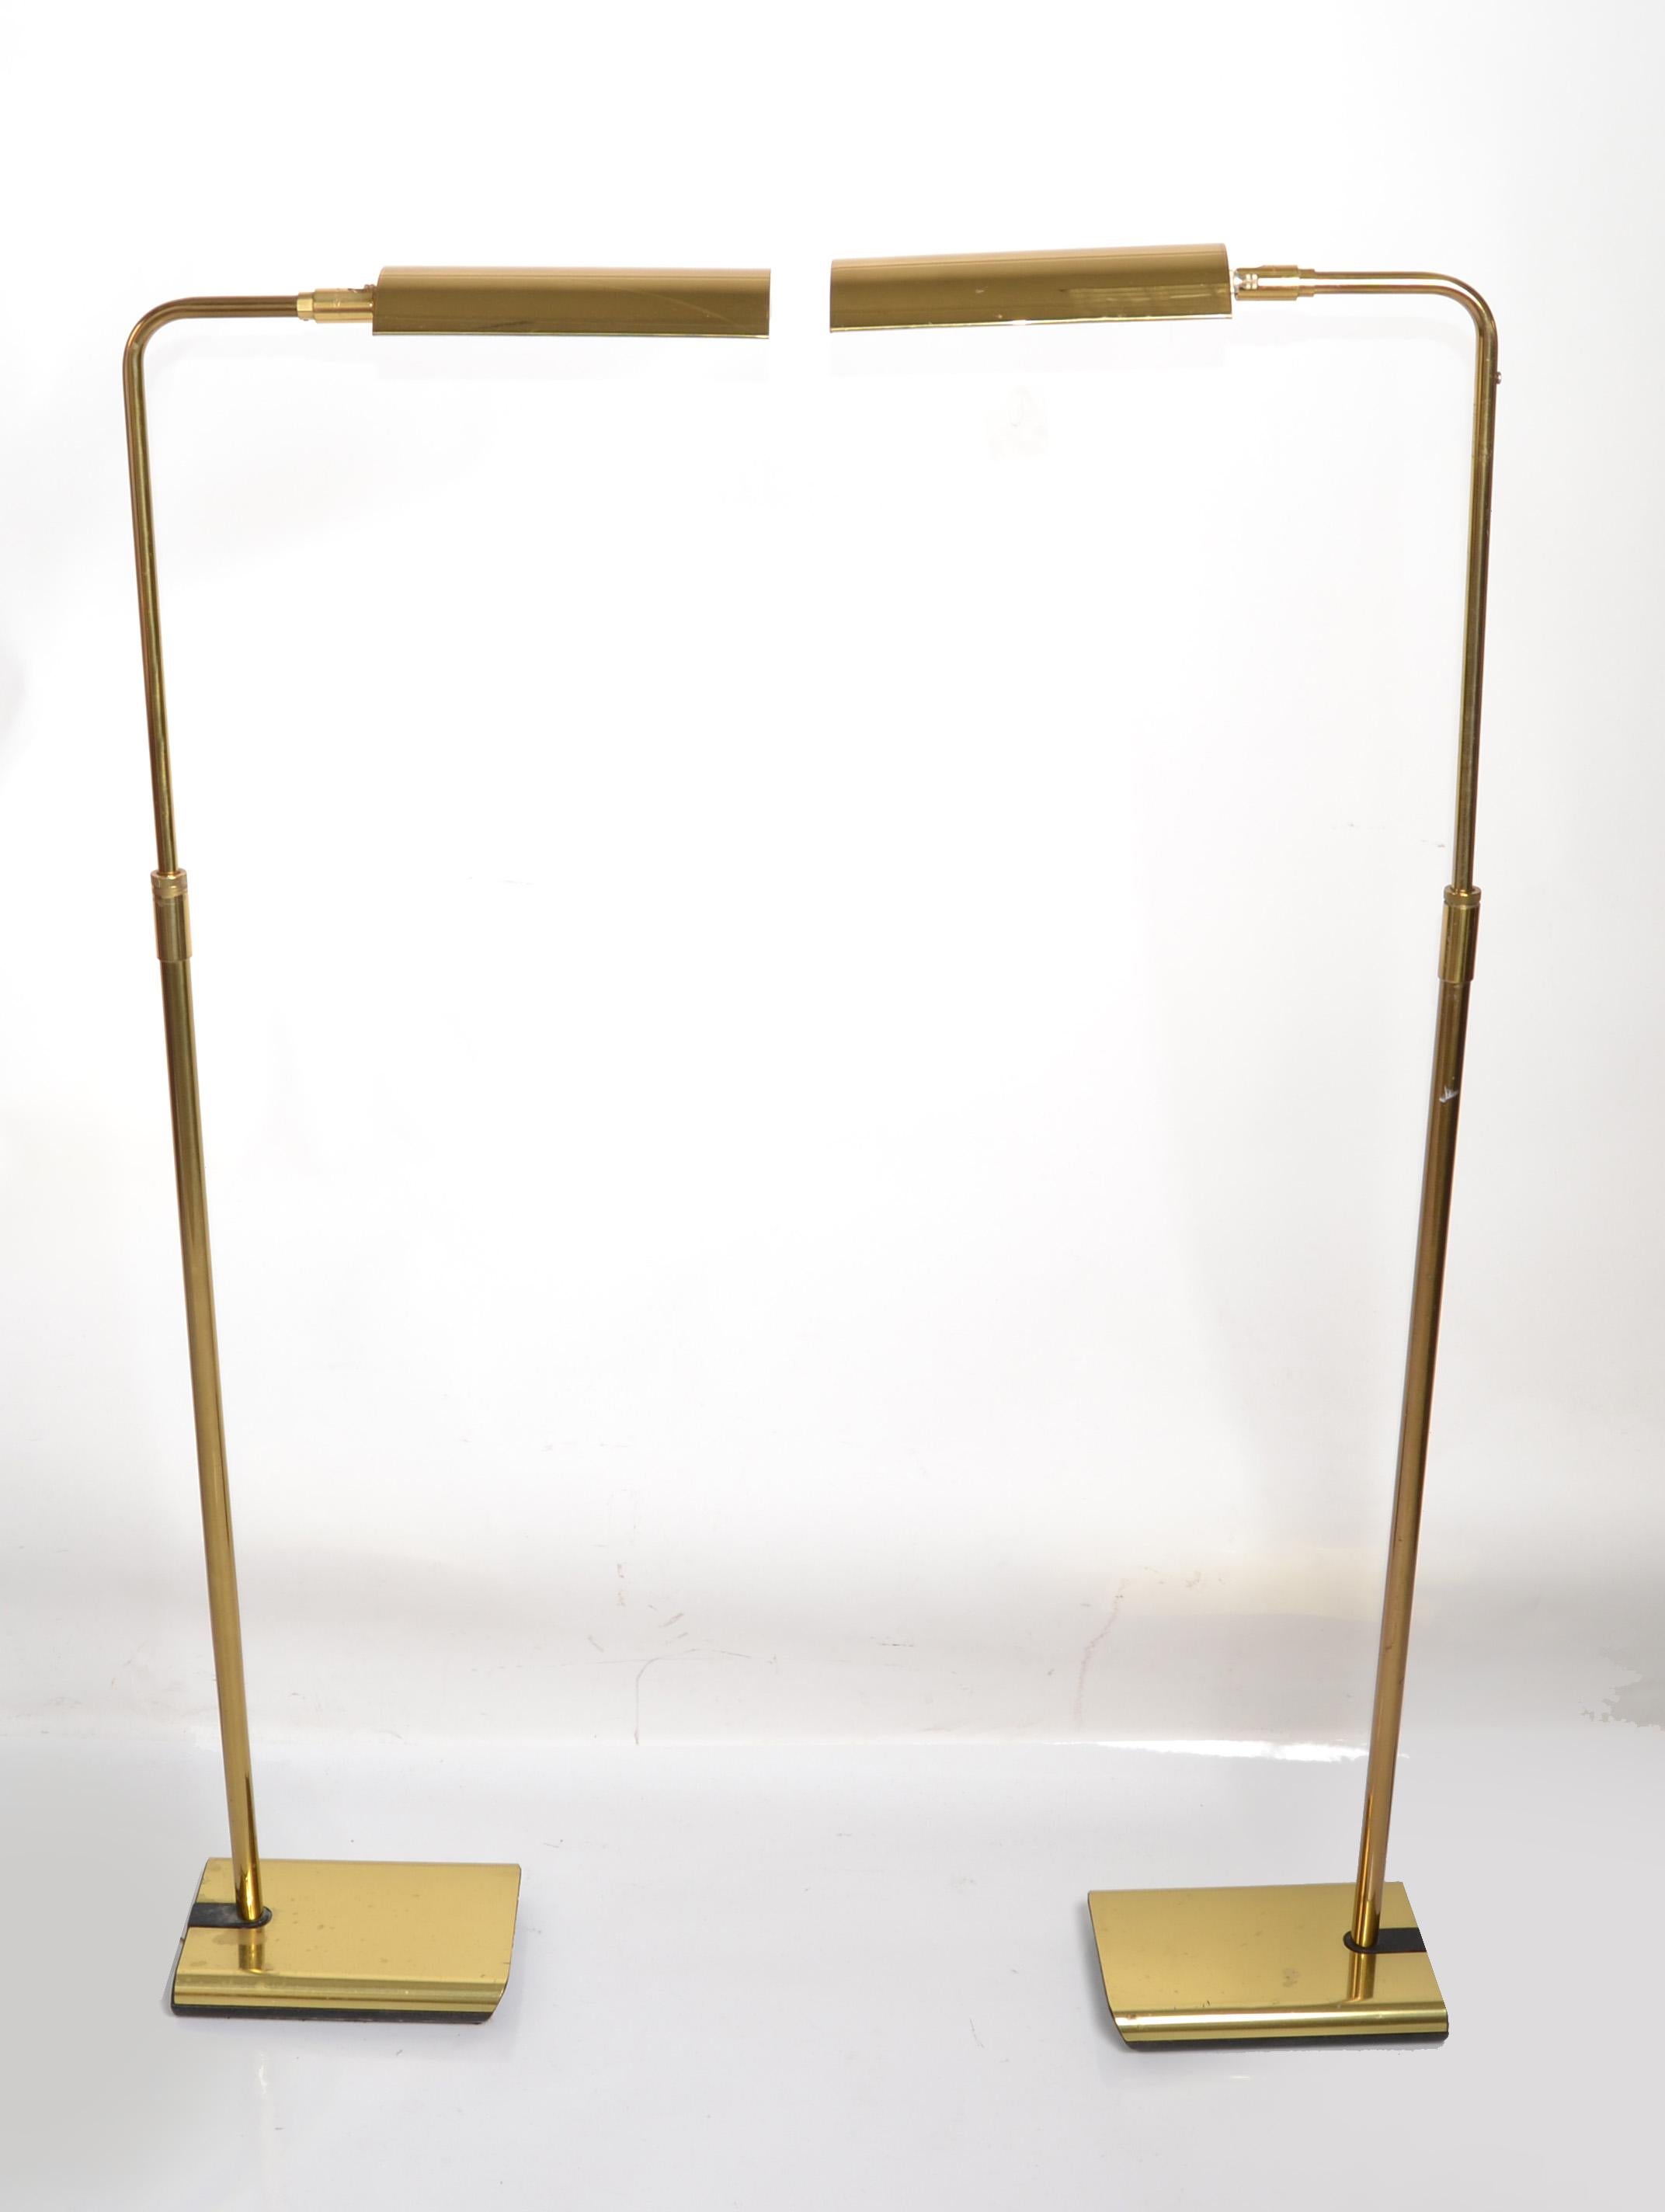 American Pair Koch & Lowy Articulated Polished Brass Floor Lamps Mid-Century Modern 1965 For Sale